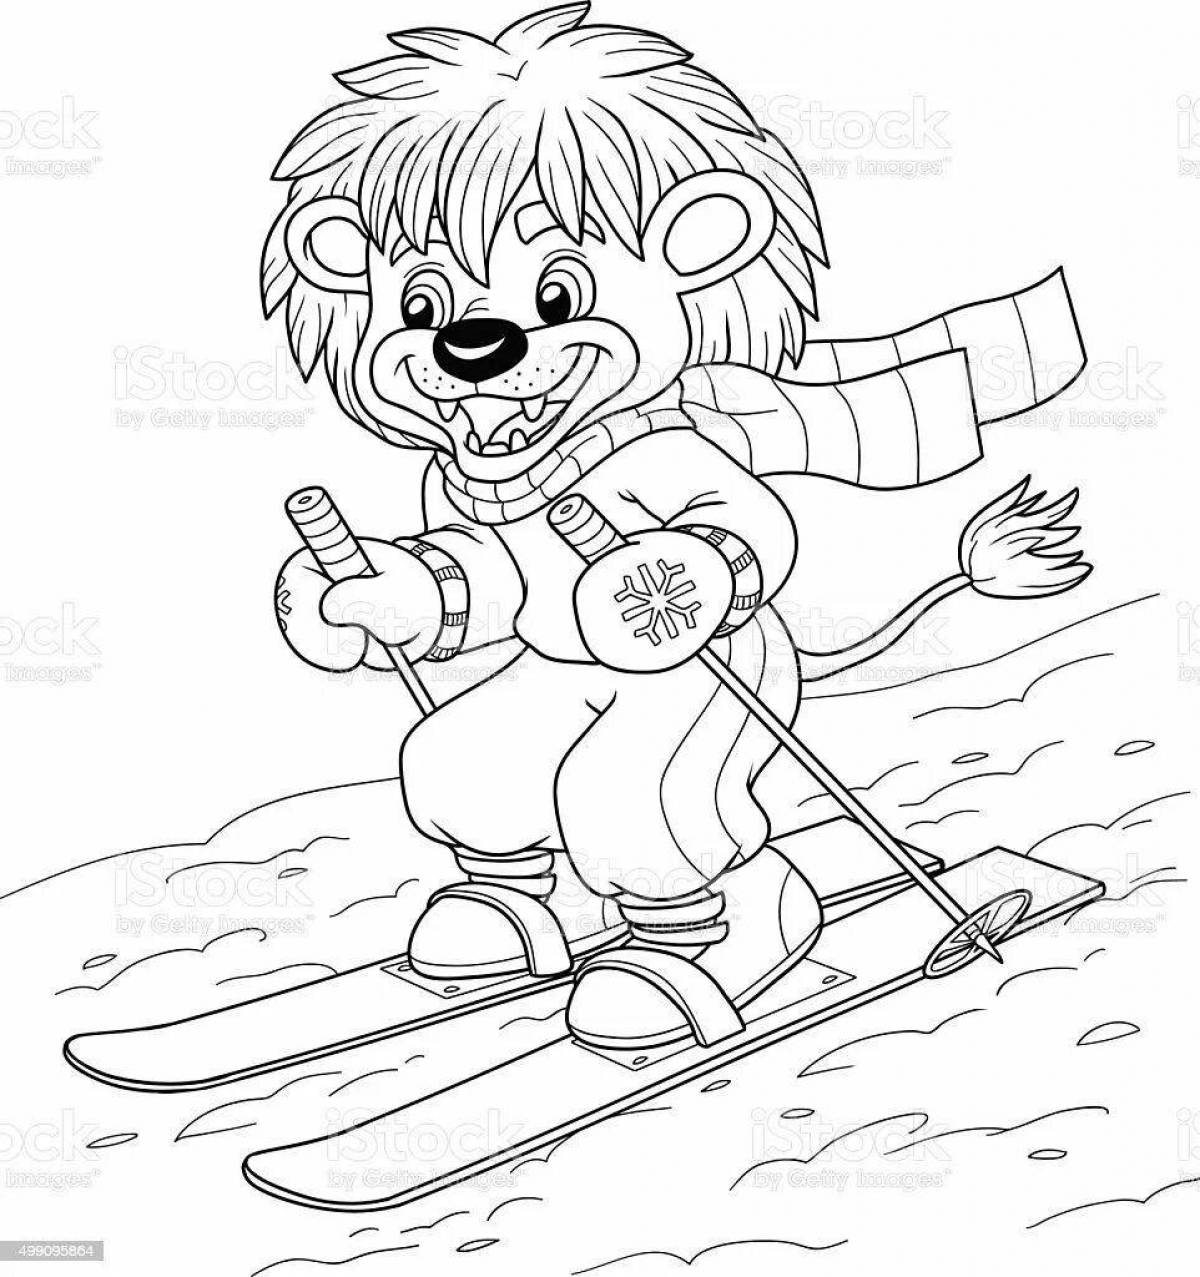 Coloring page excited bear on skis